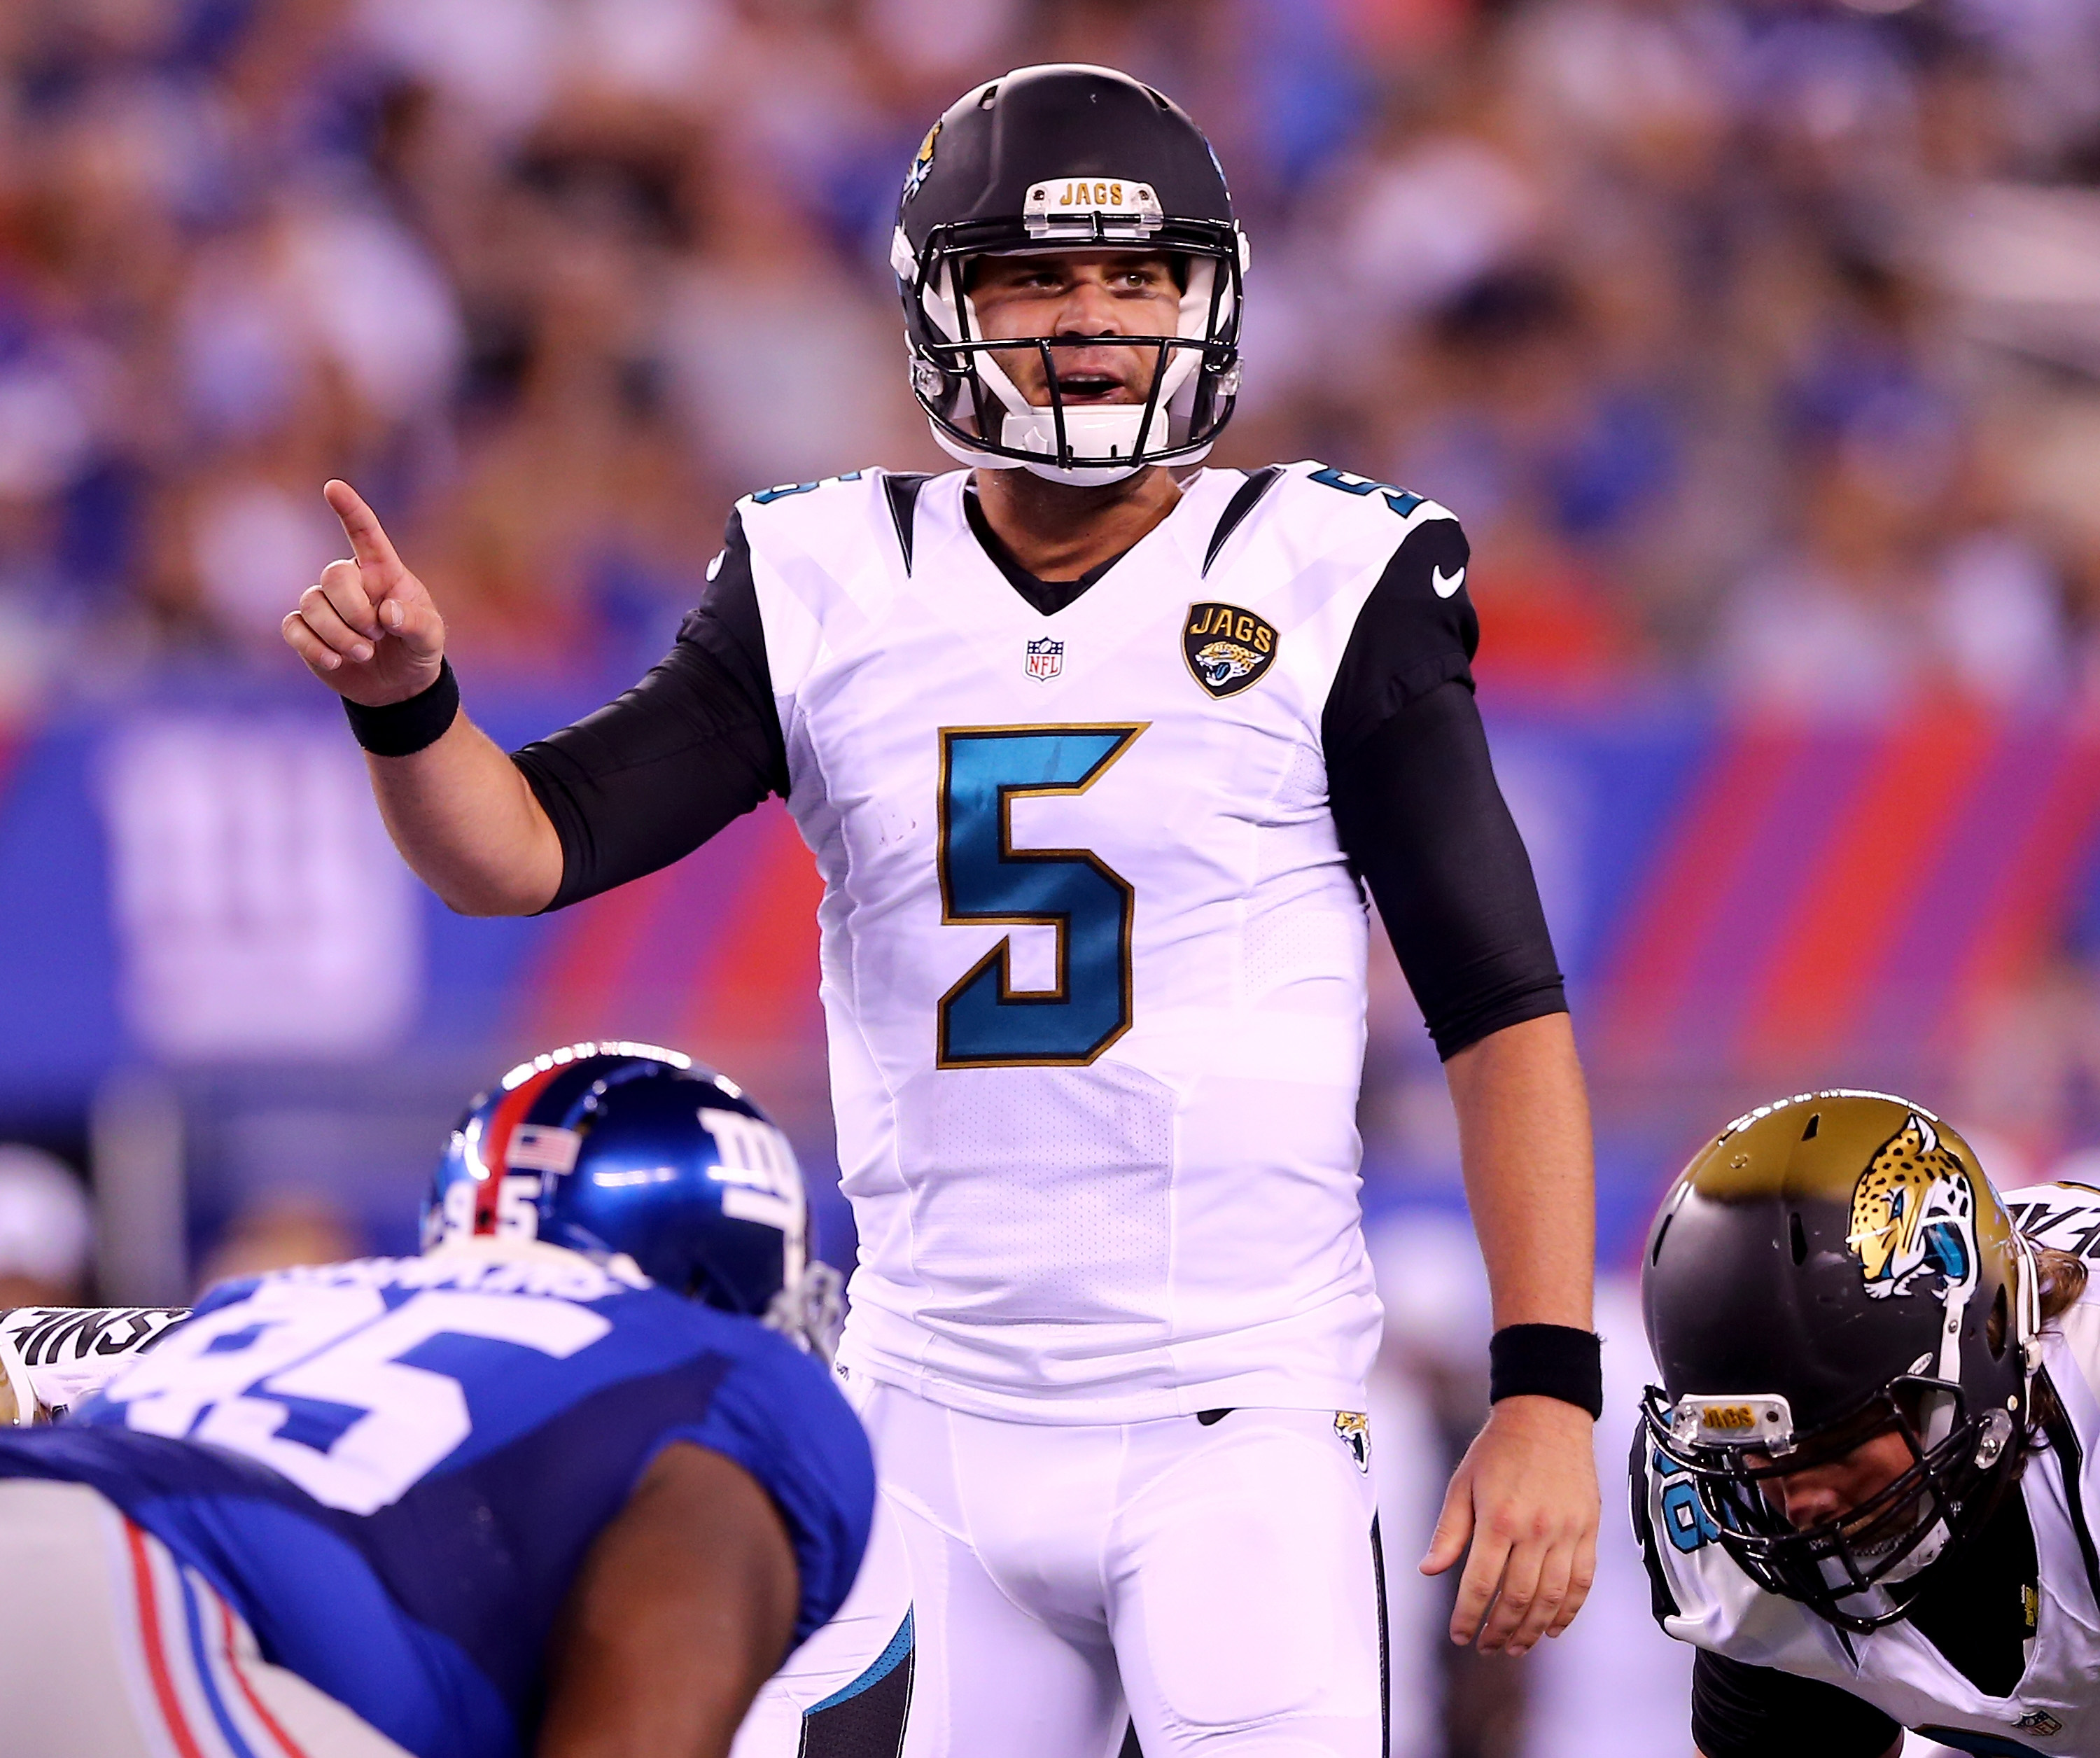 Blake Bortles is learning a new offense in his first full season as starting QB (Getty).